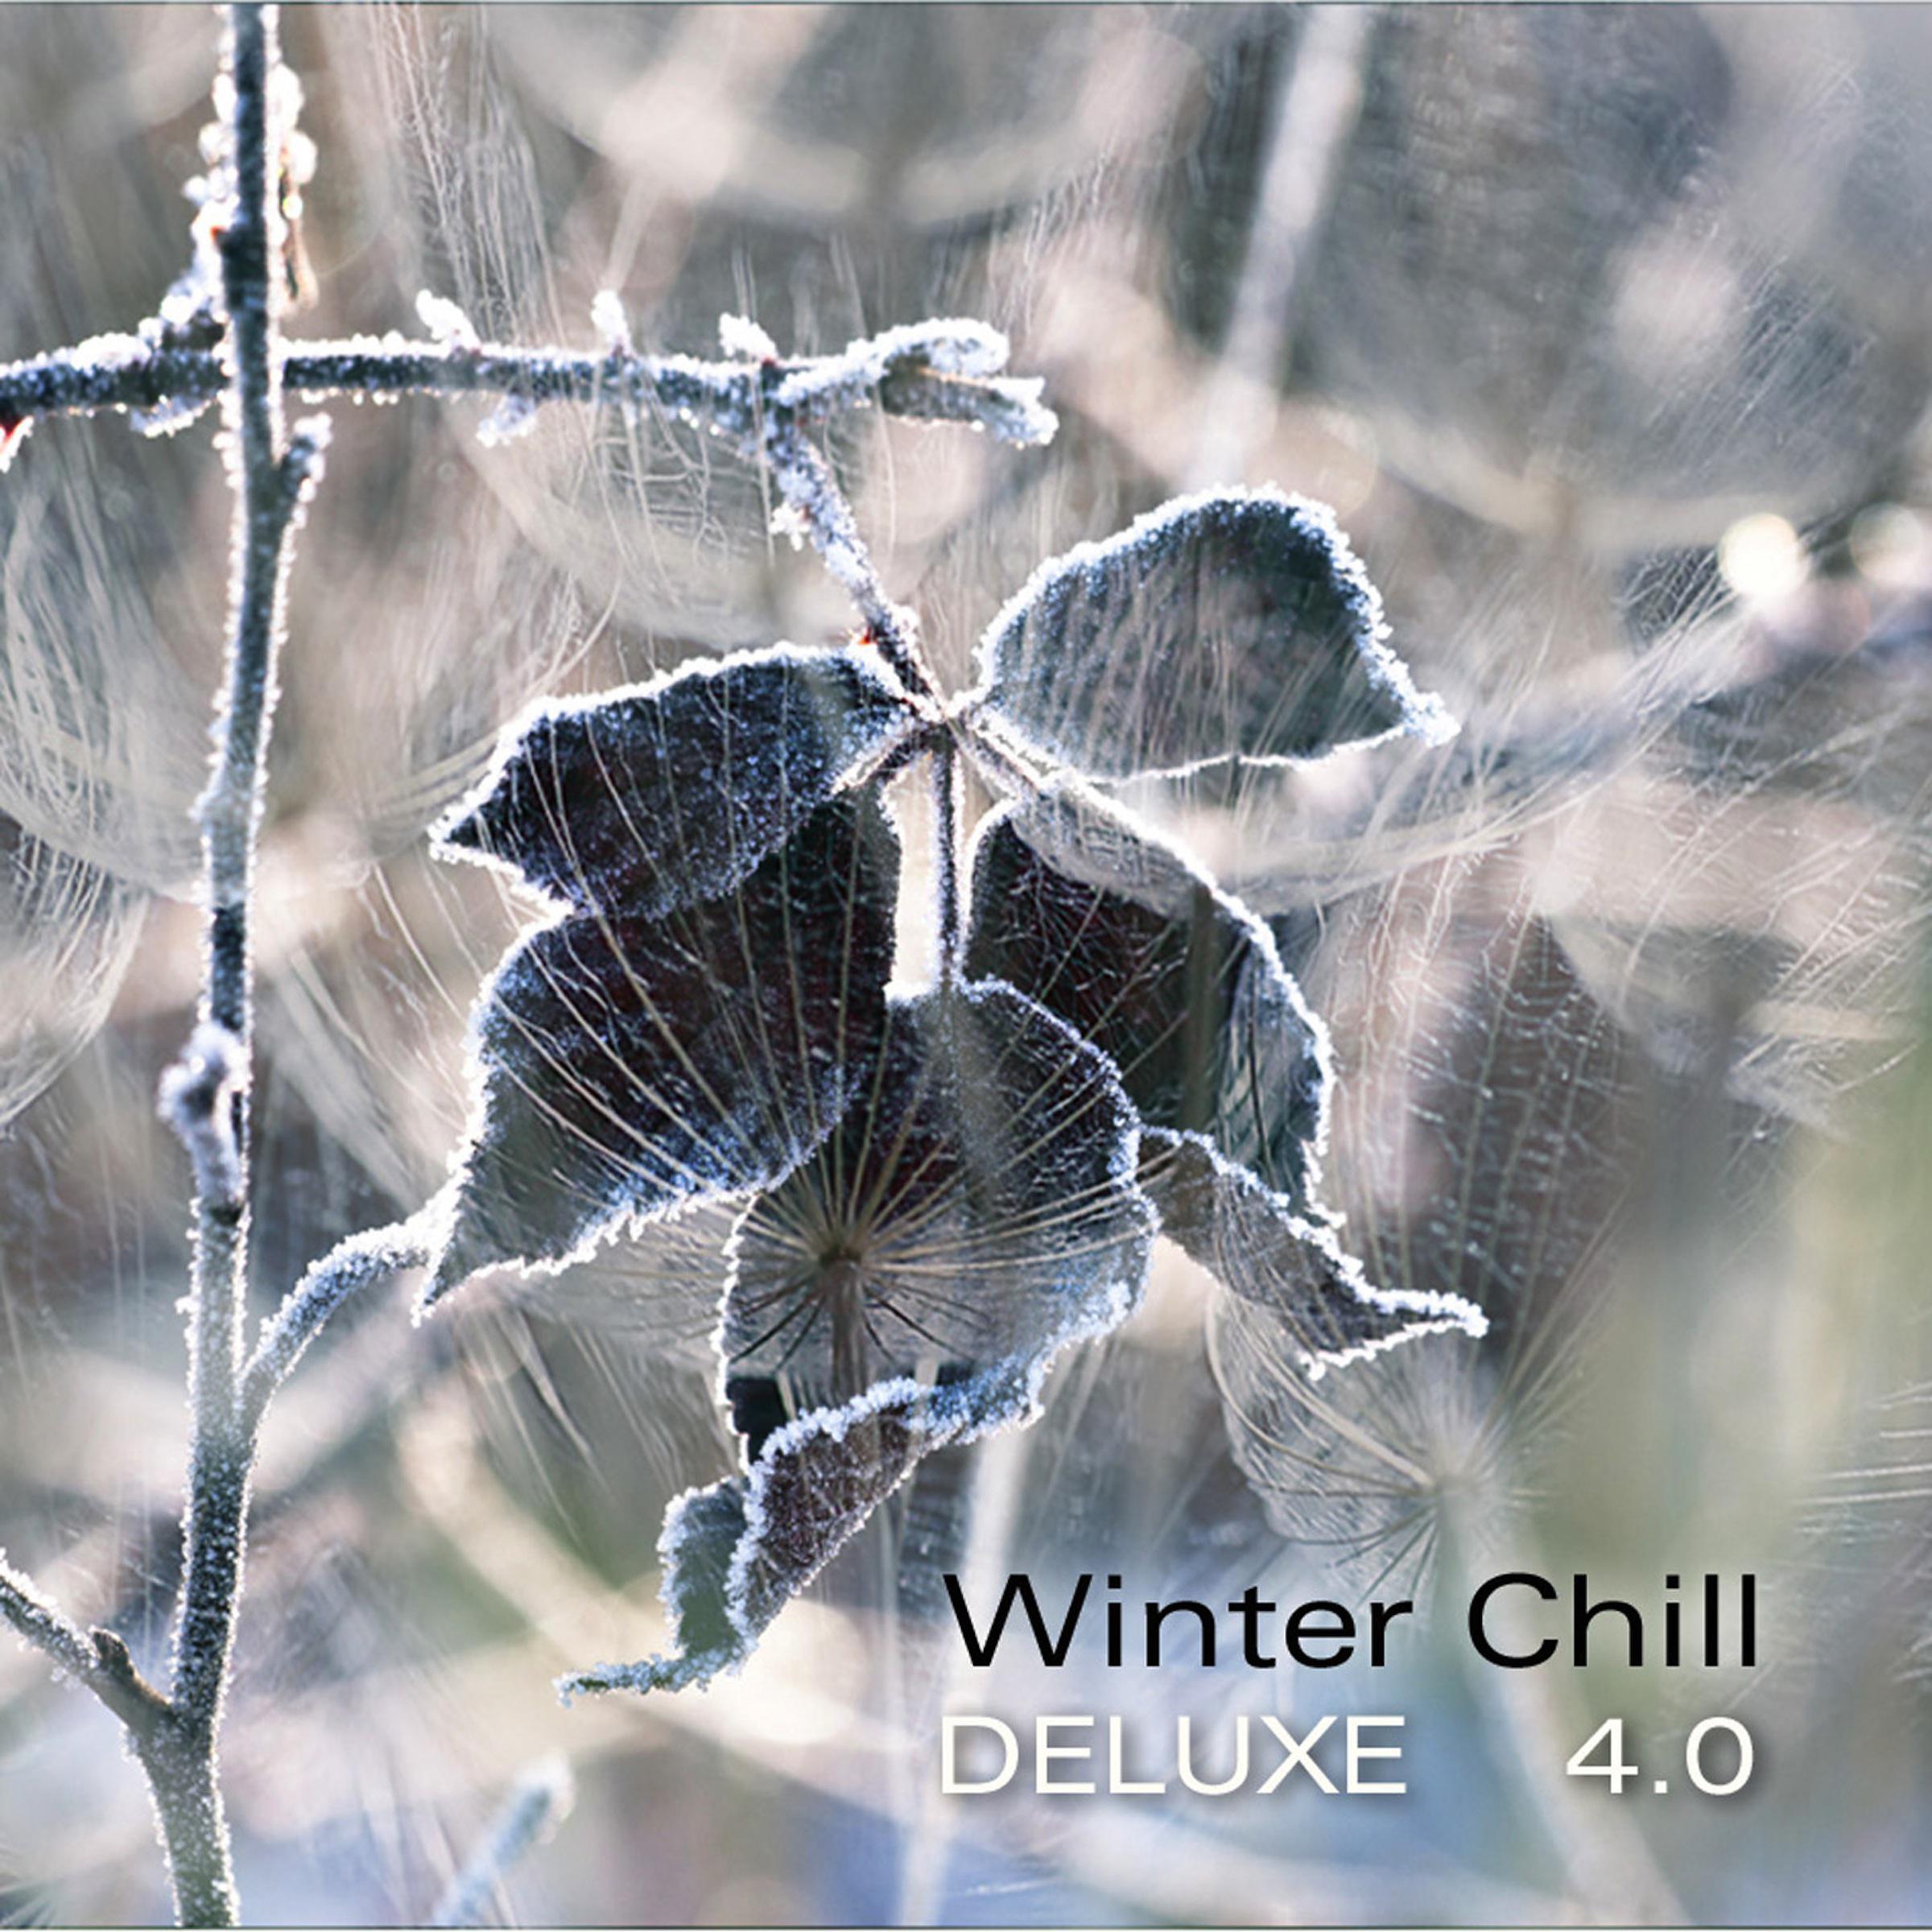 Winter Chill Deluxe 4.0